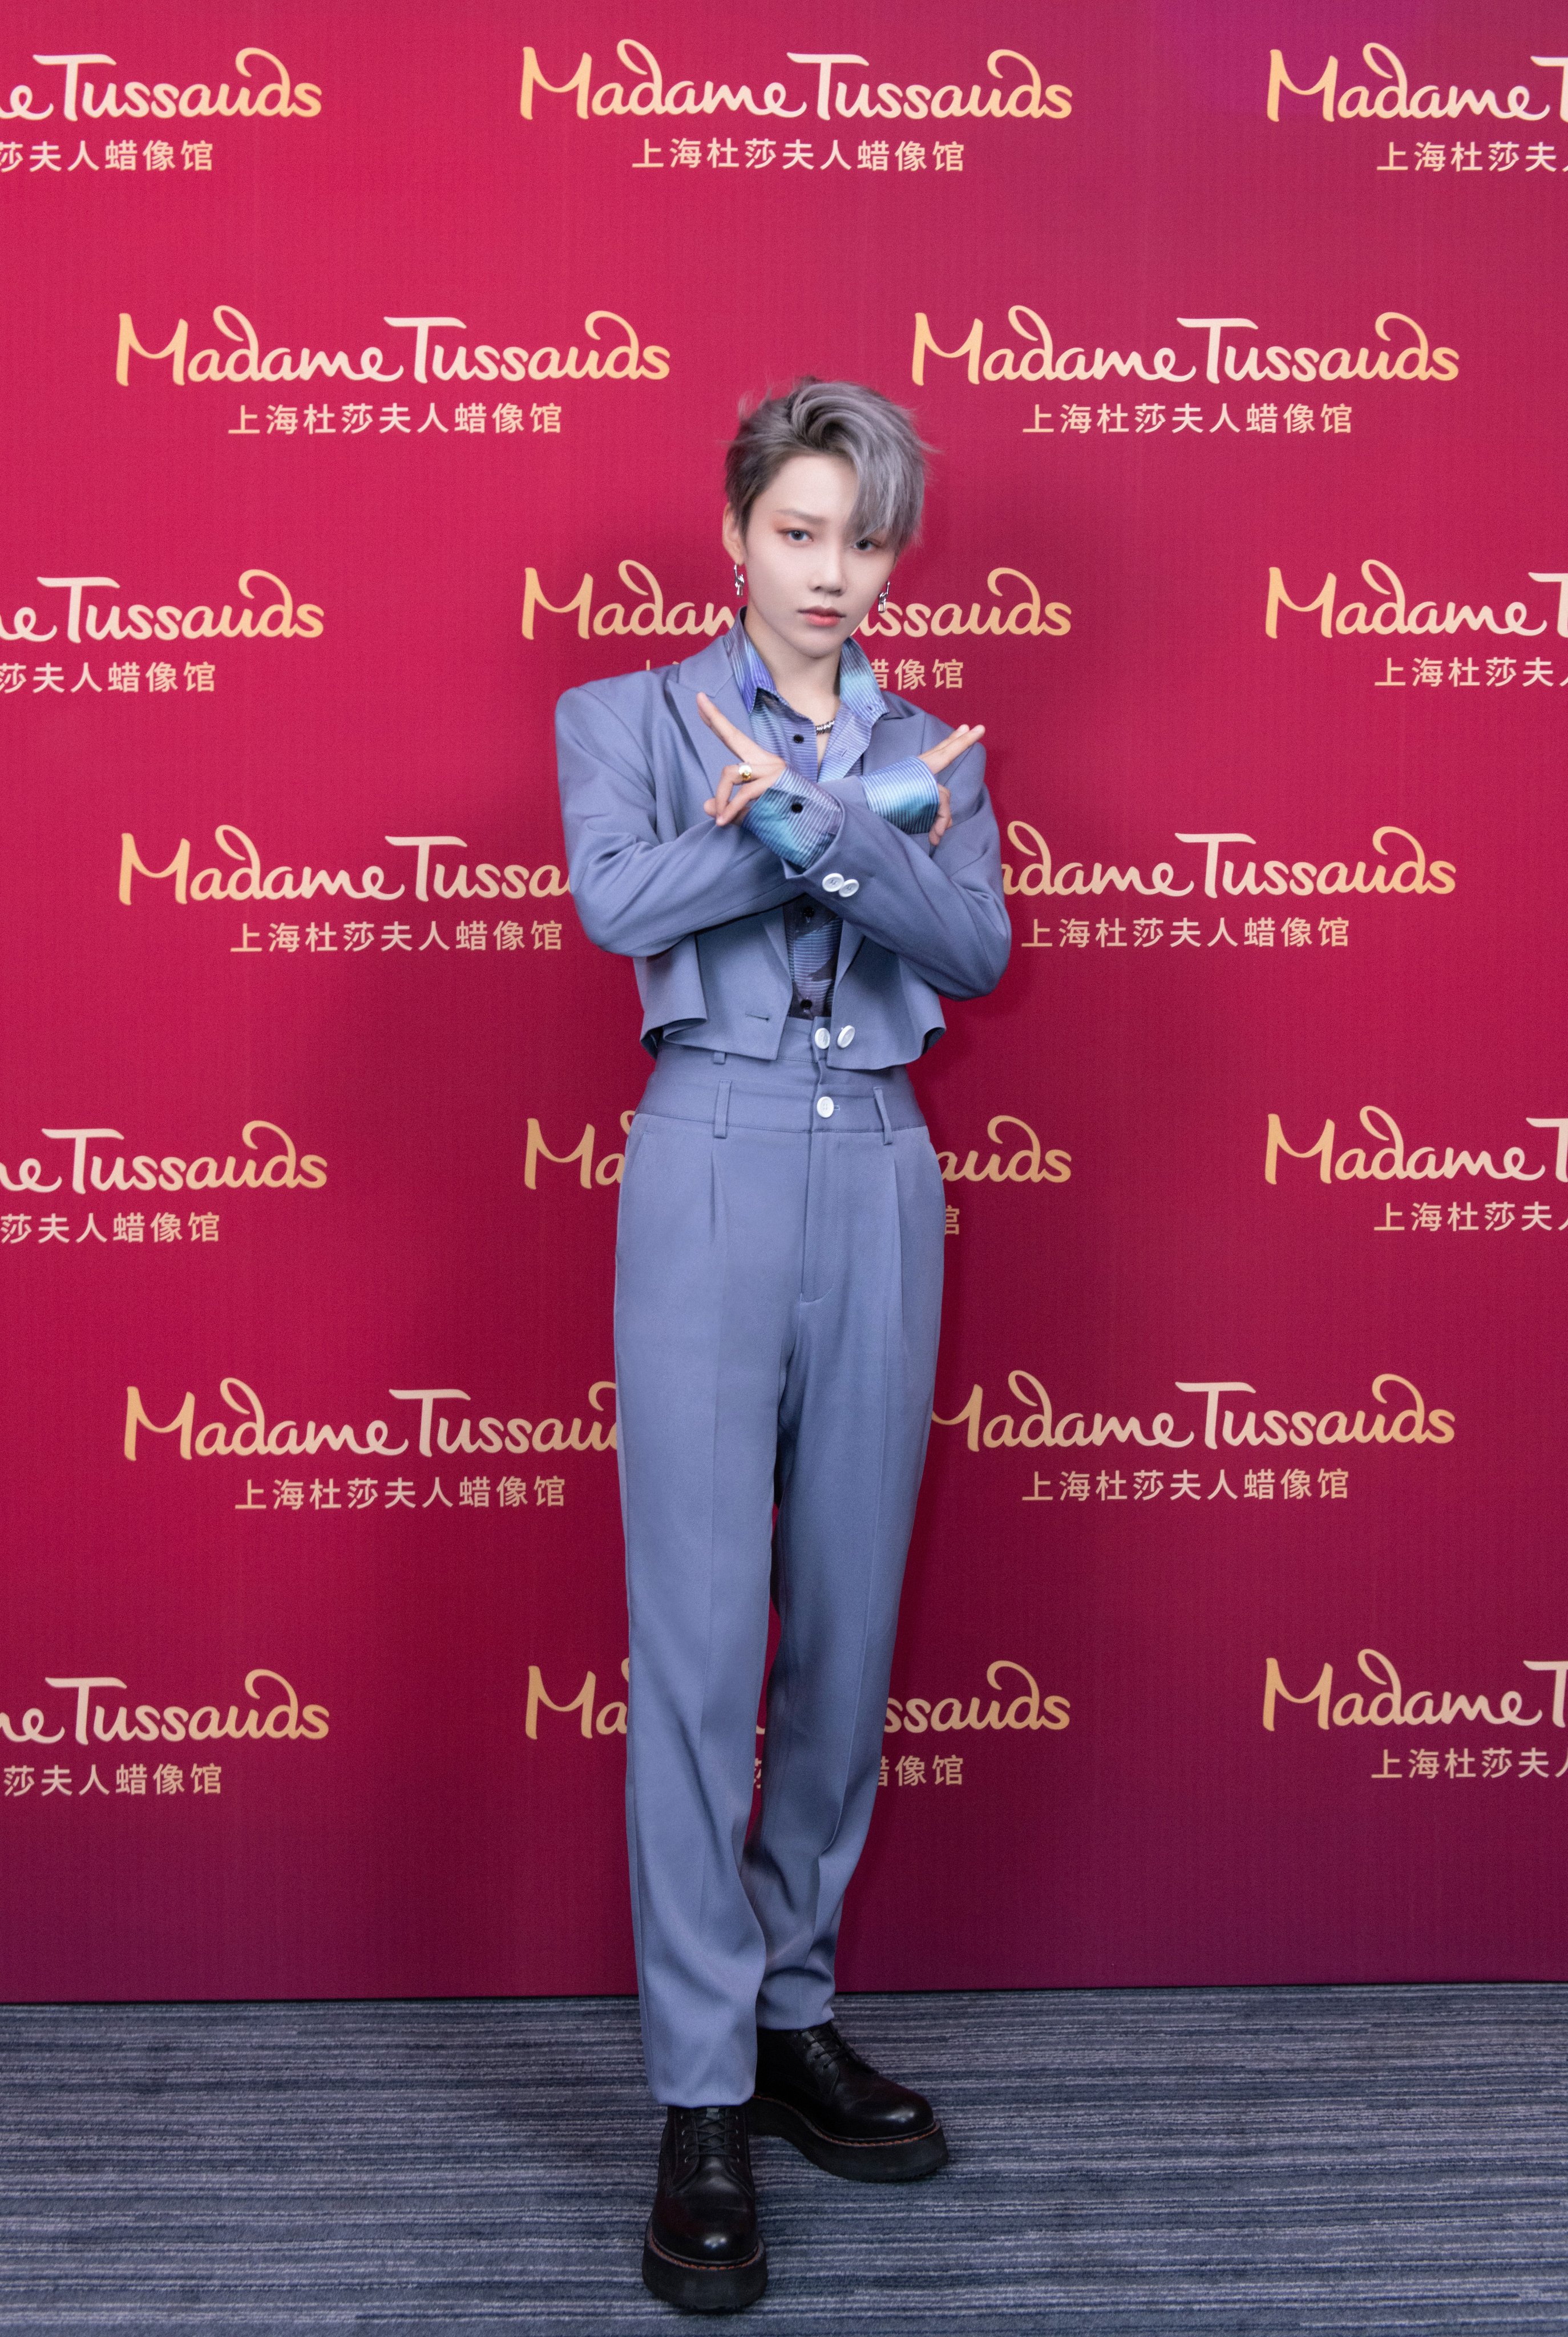 enkelt gang Af storm Barmhjertige XIN Liu H.M.T. Regions and Overseas Fan Club on X: "Madame Tussauds  Shanghai Weibo Update She aims for the best, and keep unlocking "New/XIN"  identities. Every move on stage, every line of